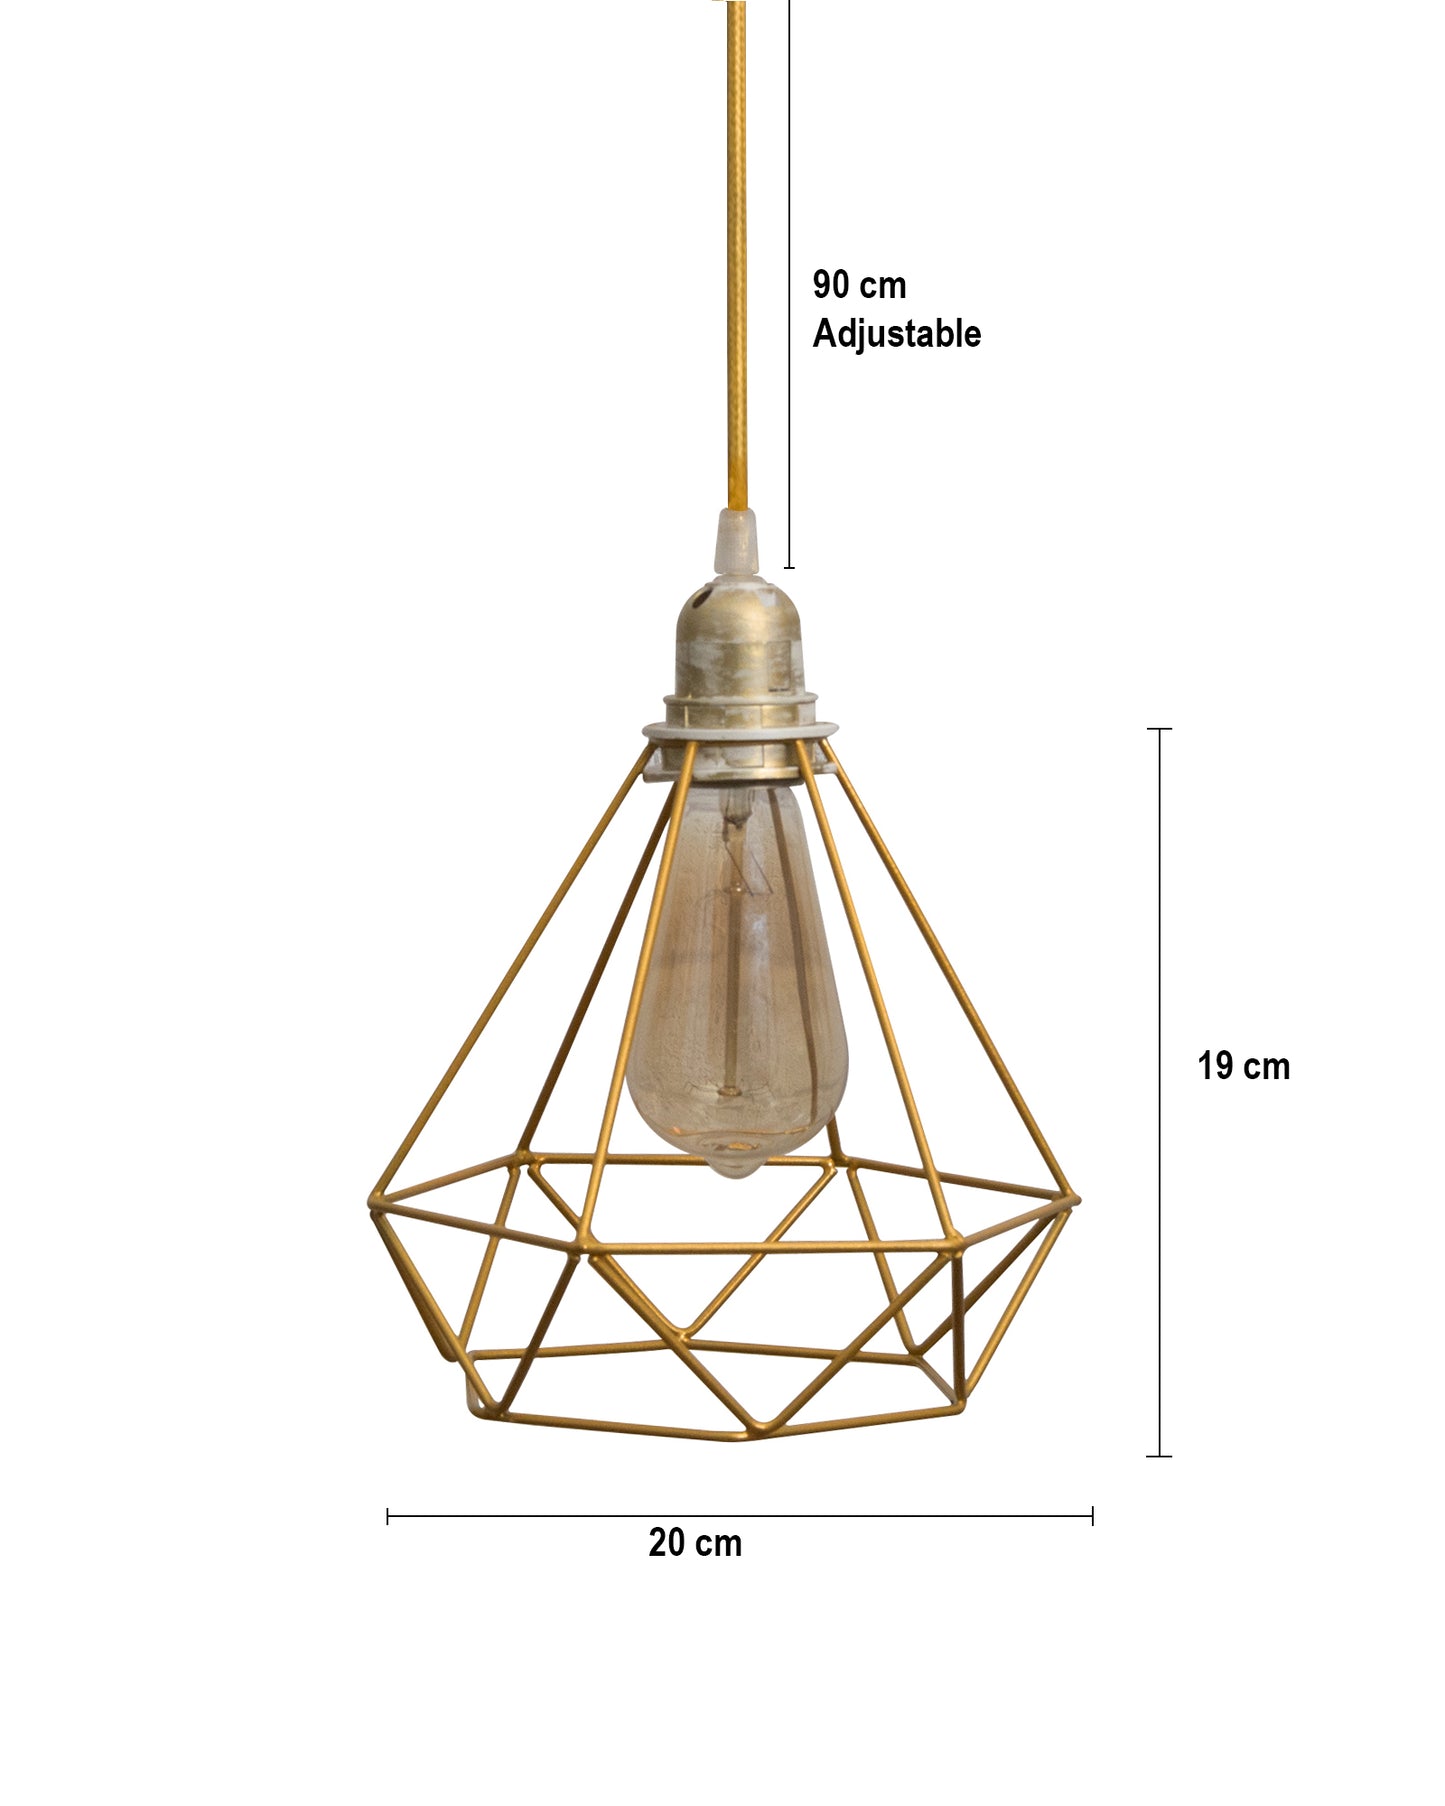 Lighting Golden Metal Cage Lampshade for Pendant Light With Antique handcraft brushed Holders Hanging Lighting Cord Fixture Farmhouse Bedroom Dining Room Decoration